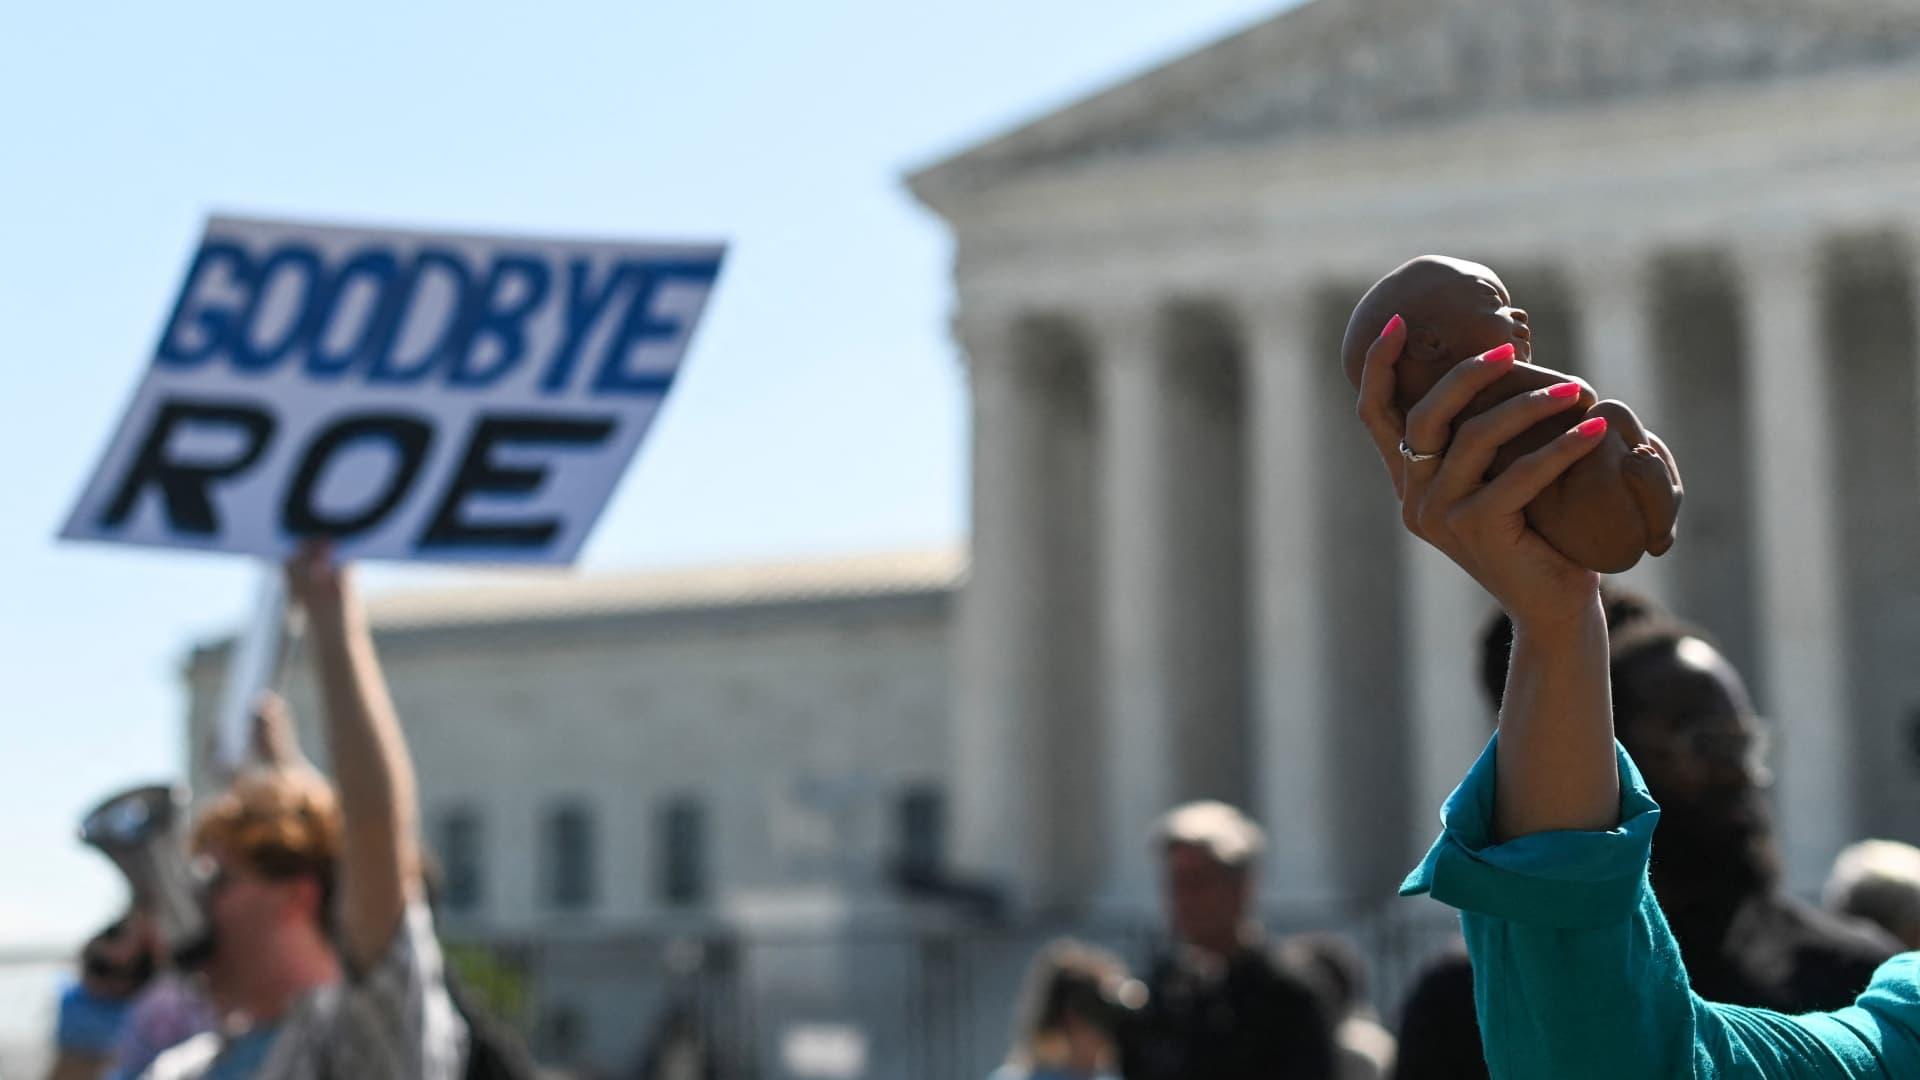 Supreme Court overturns Roe v. Wade, ending 50 years of federal abortion rights